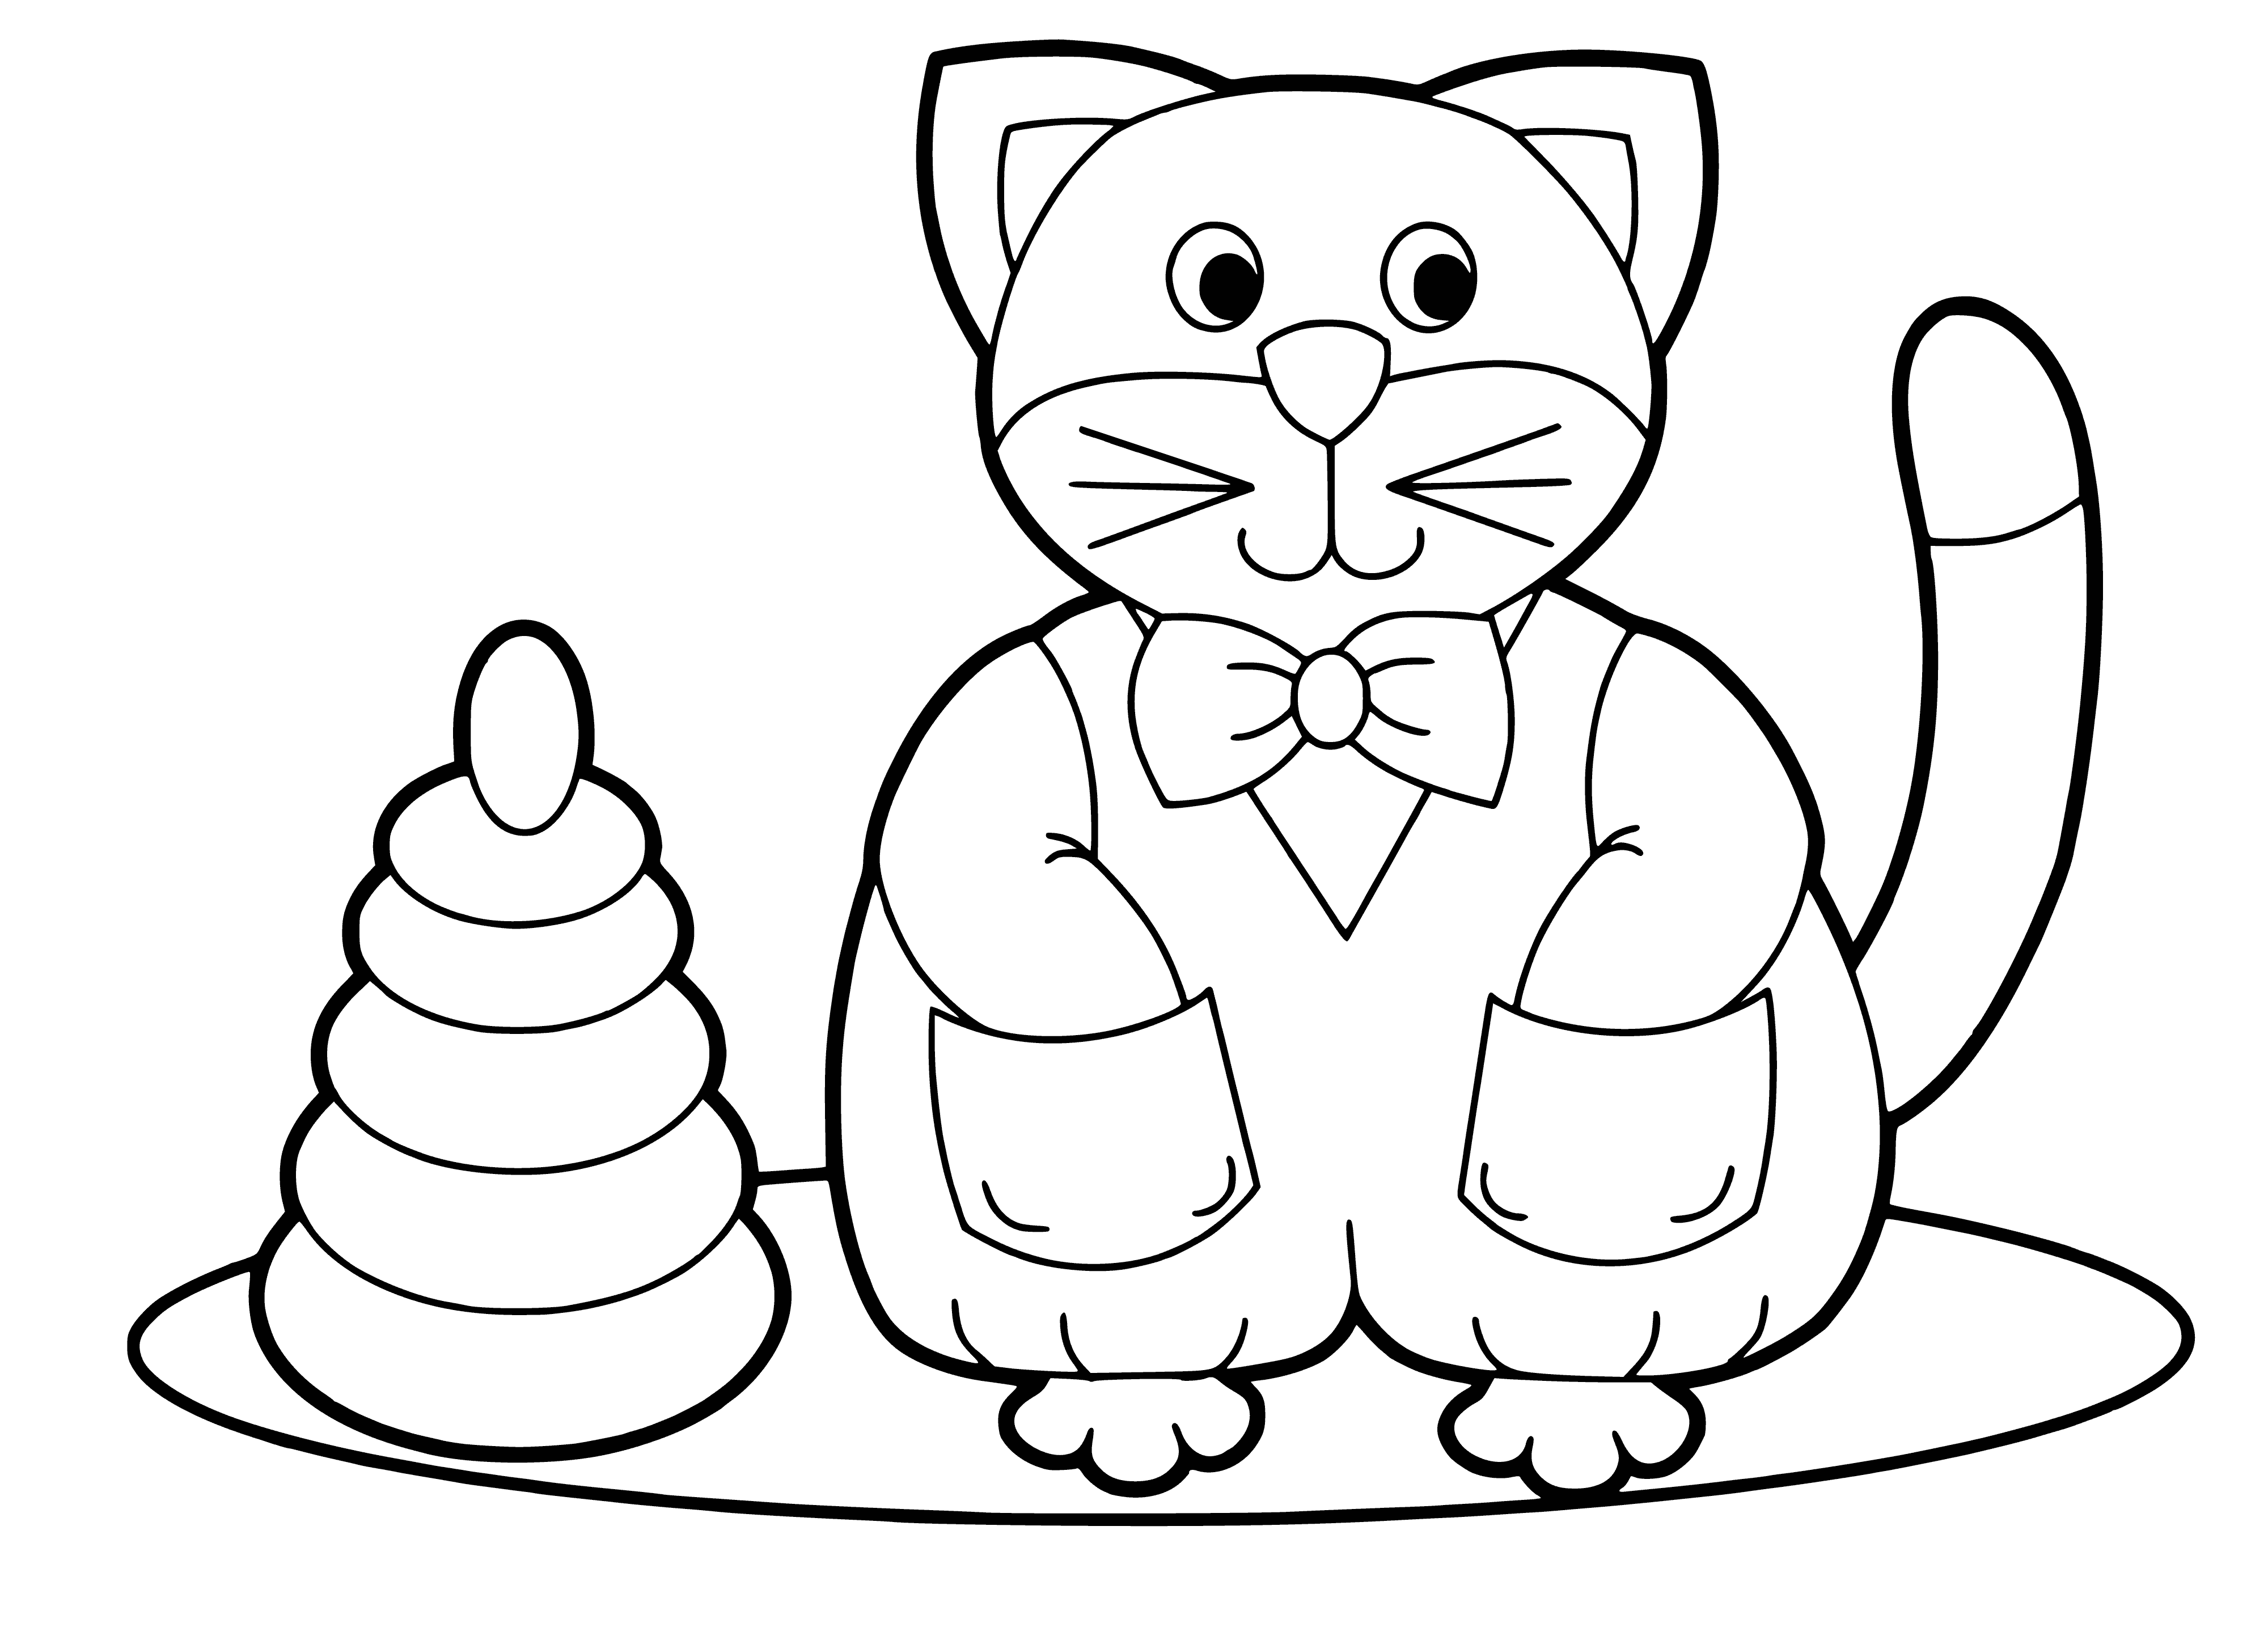 coloring page: Black cat lies on green/yellow rug with green eyes and yellow collar with bell.